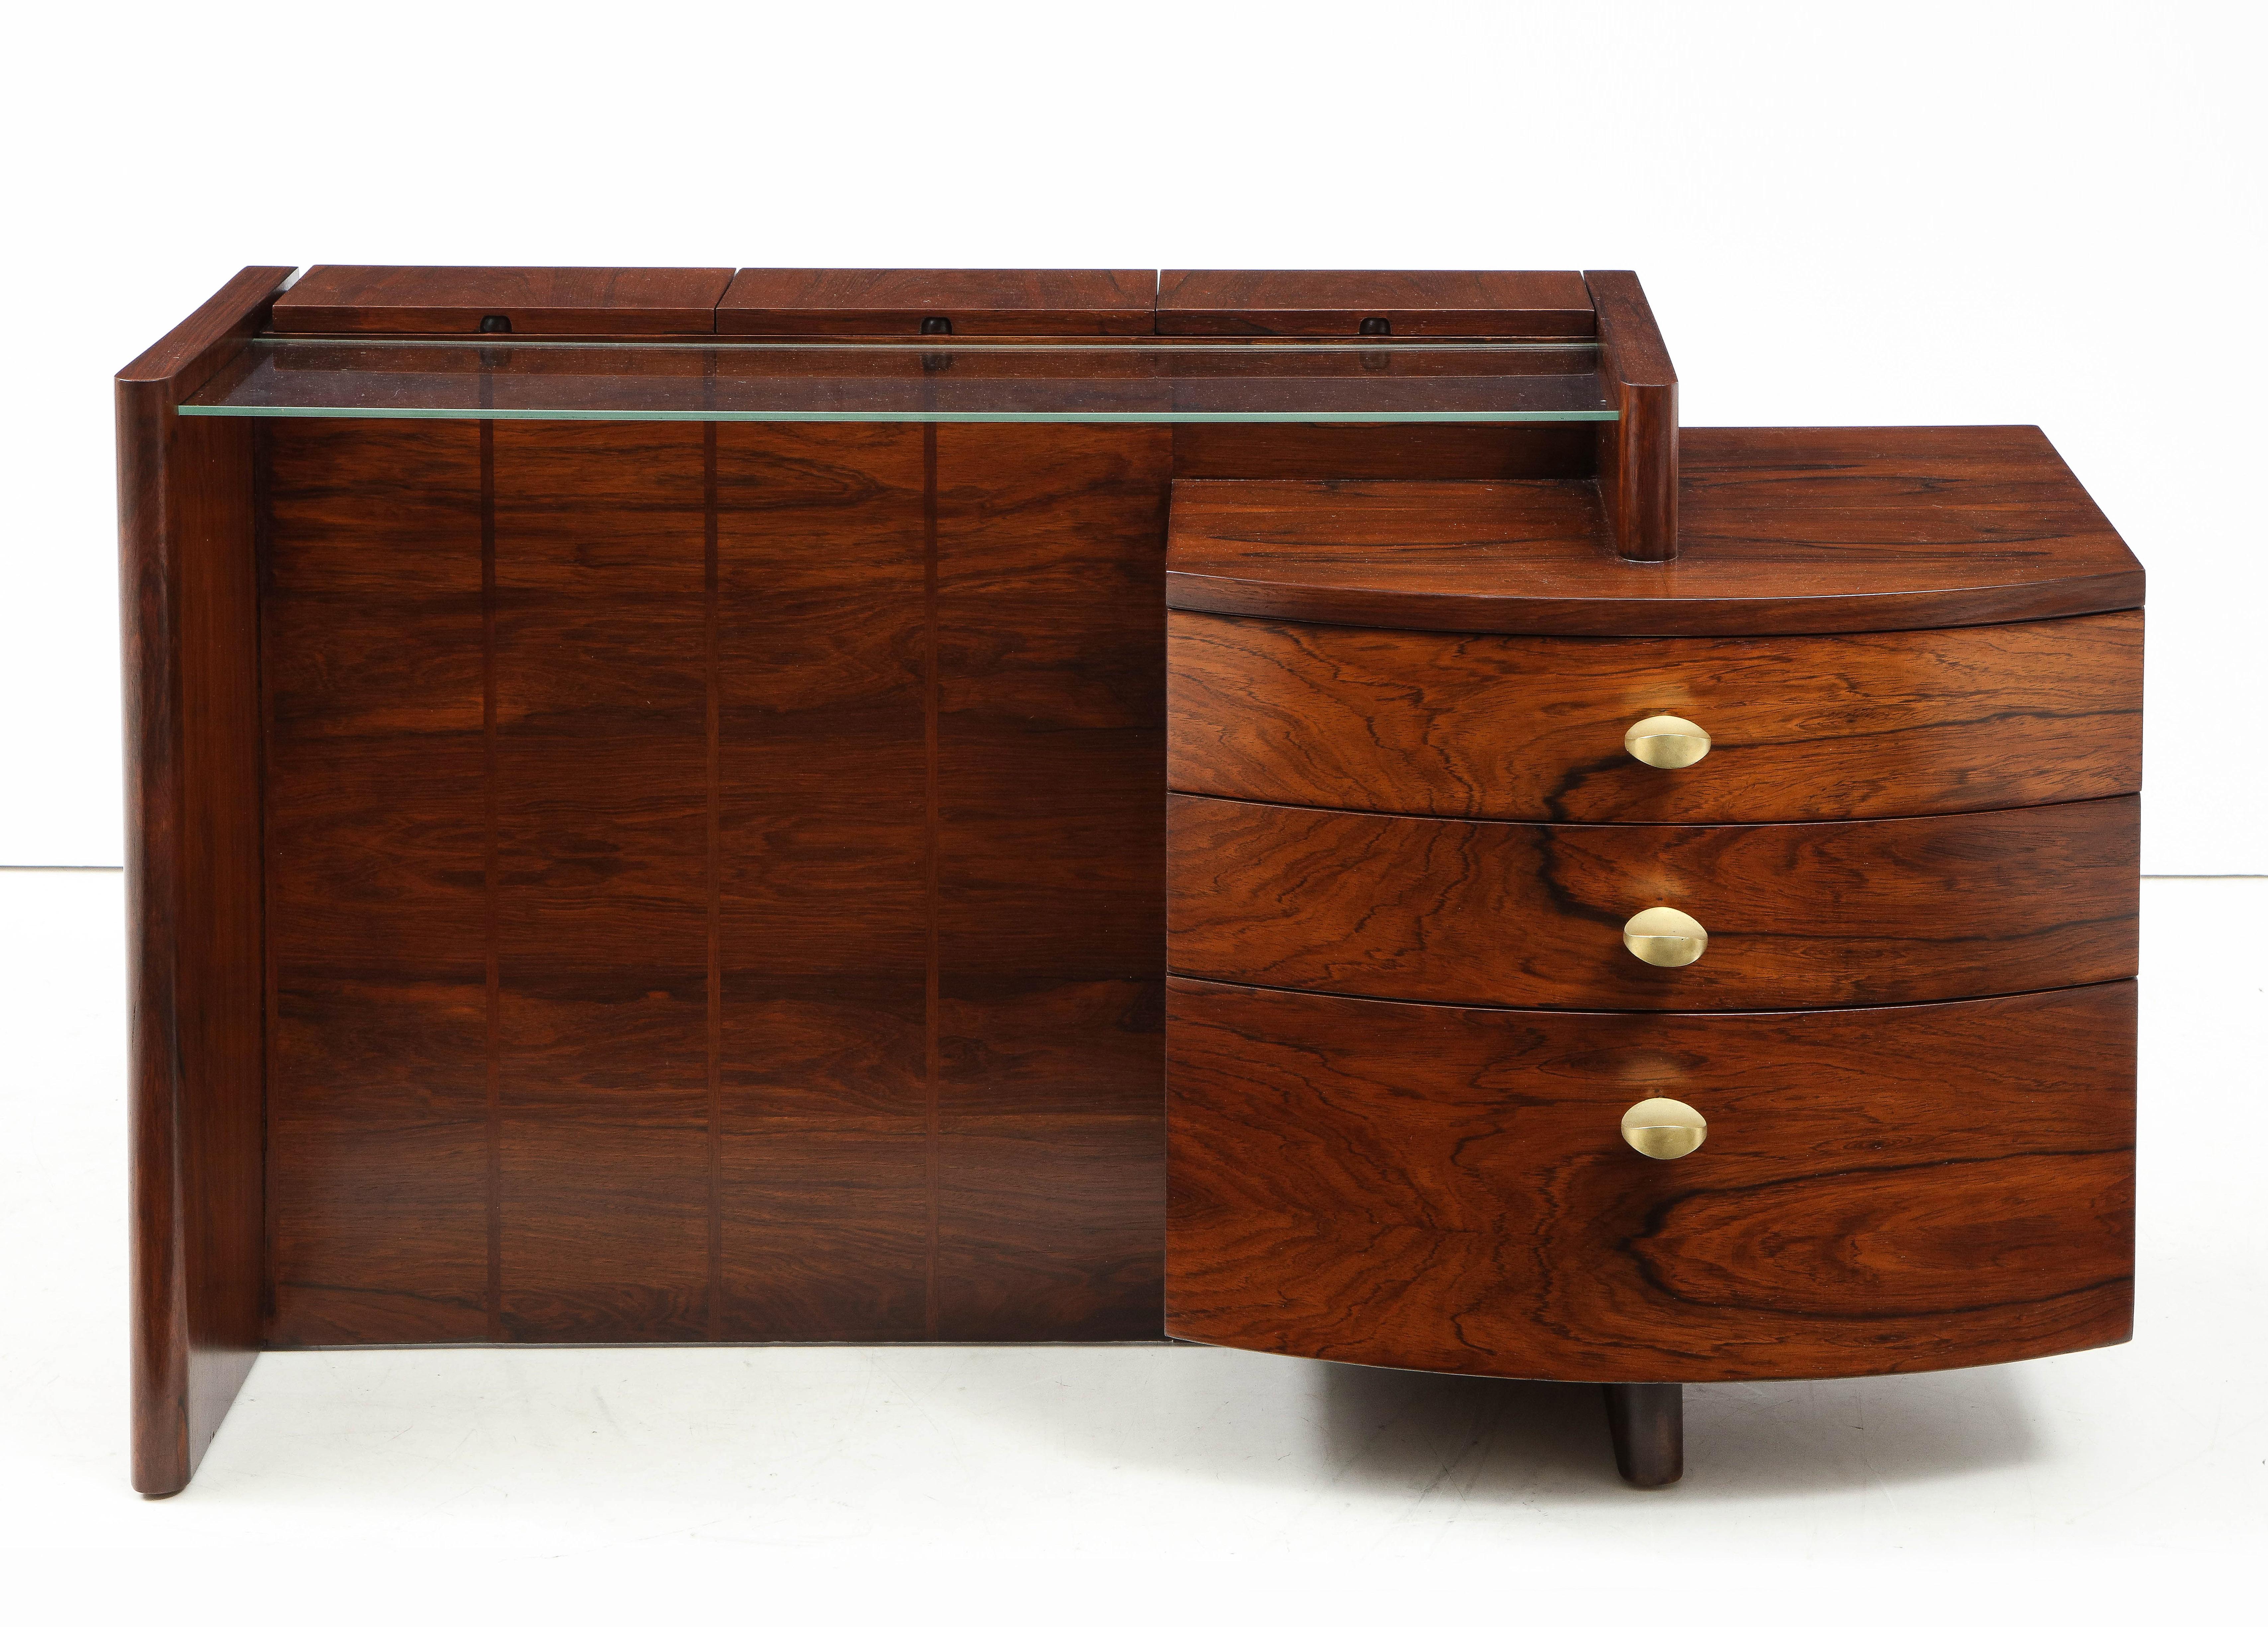 Stunning 1940s Gilbert Rohde designed for Herman Miller Model number 3770 vanity, made of Brazilian rosewood with 3 drawers 3 small storage compartments and glass shelf.